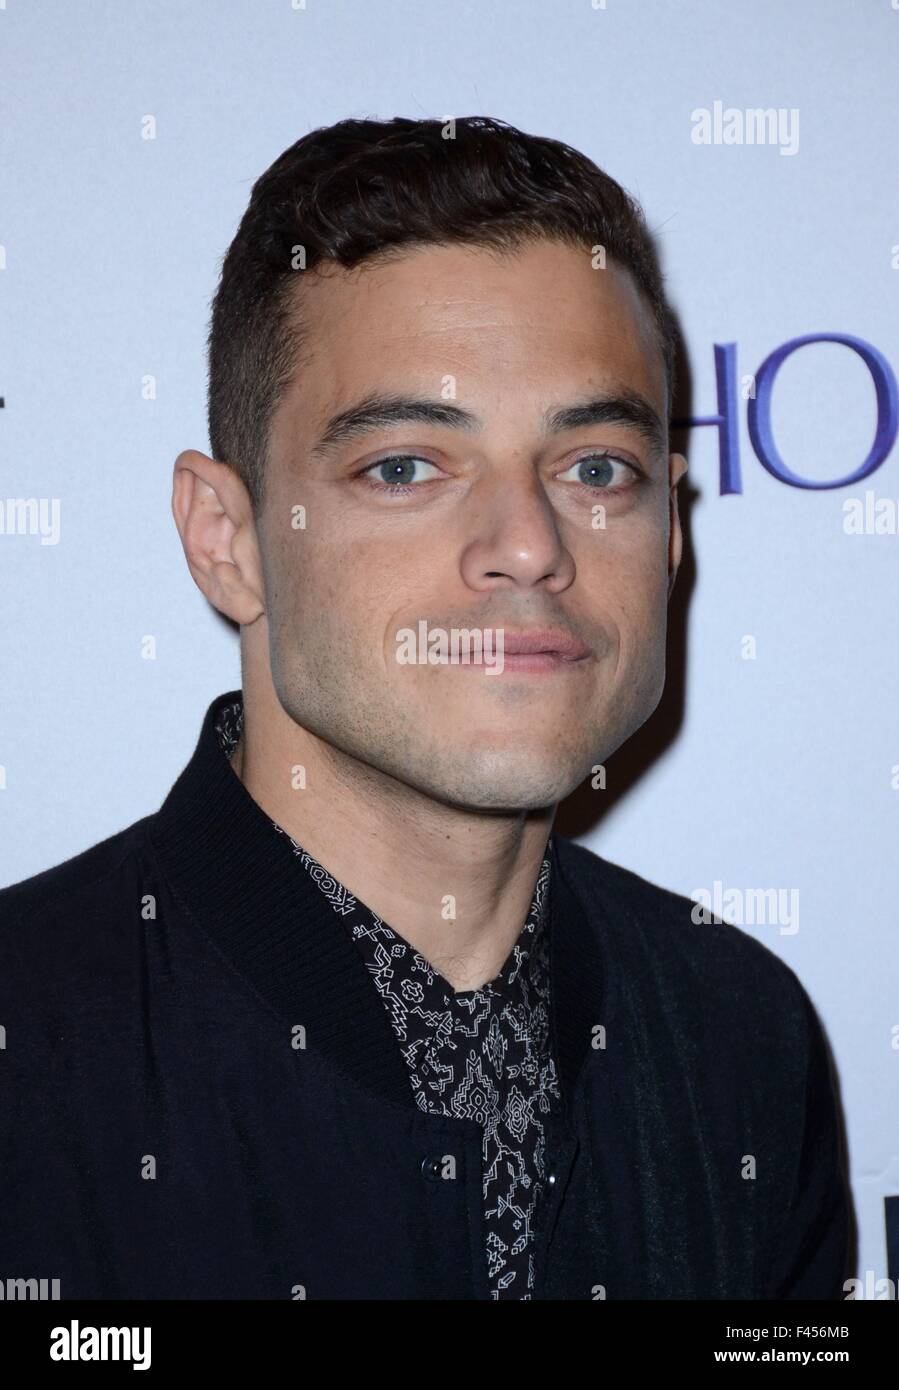 New York, NY, USA. 14th Oct, 2015. Rami Malek in attendance for PaleyFest  New York: MR. ROBOT, The Paley Center for Media, New York, NY October 14,  2015. Credit: Derek Storm/Everett Collection/Alamy